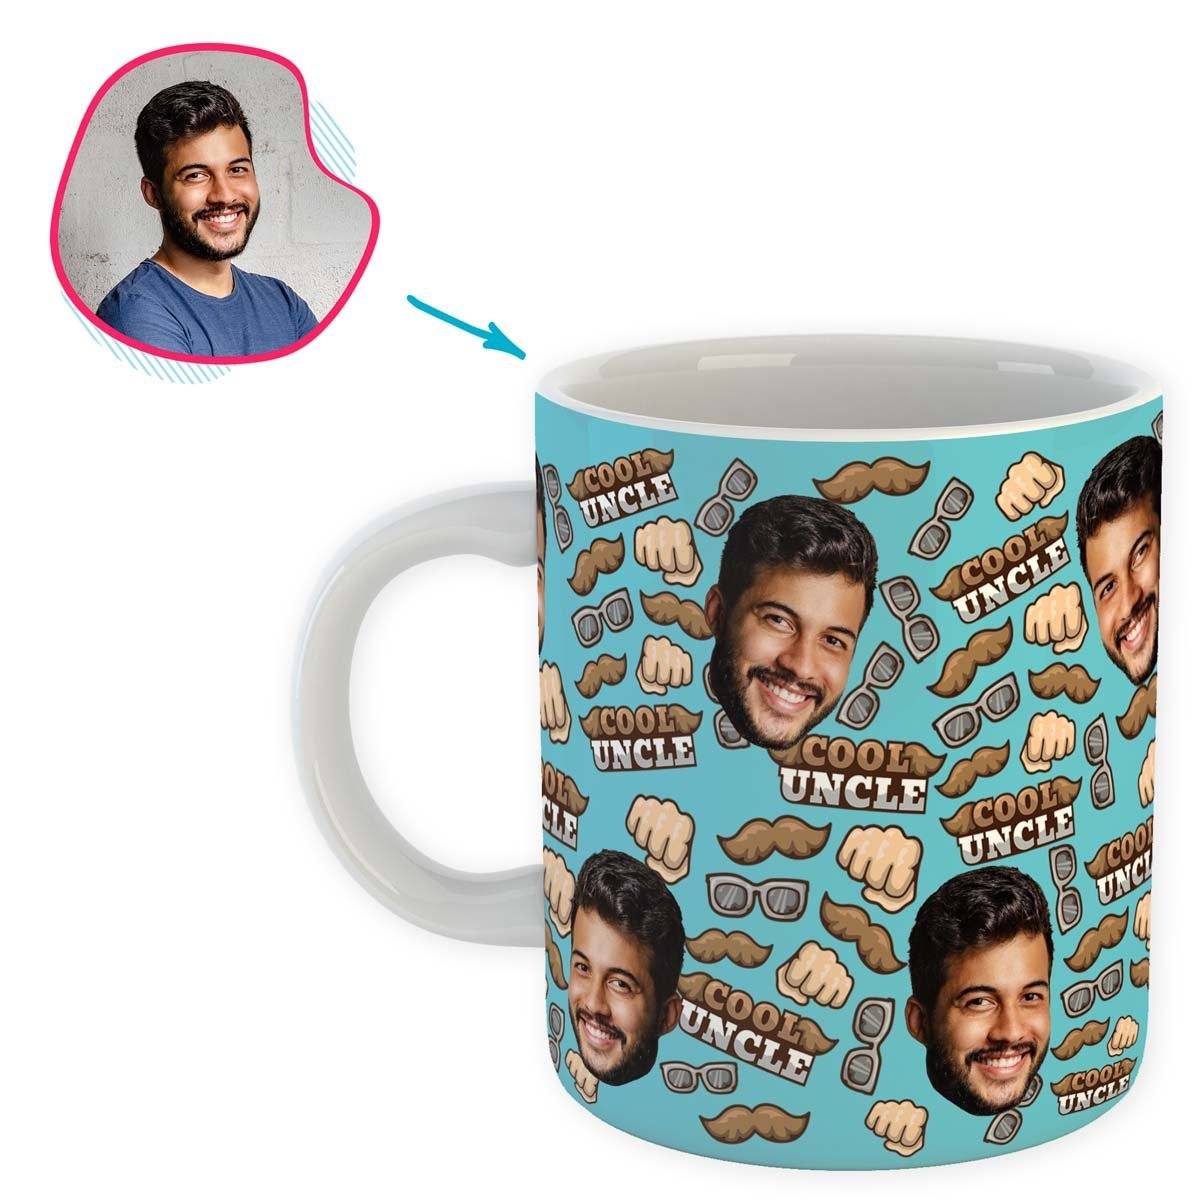 Blue Uncle personalized mug with photo of face printed on it